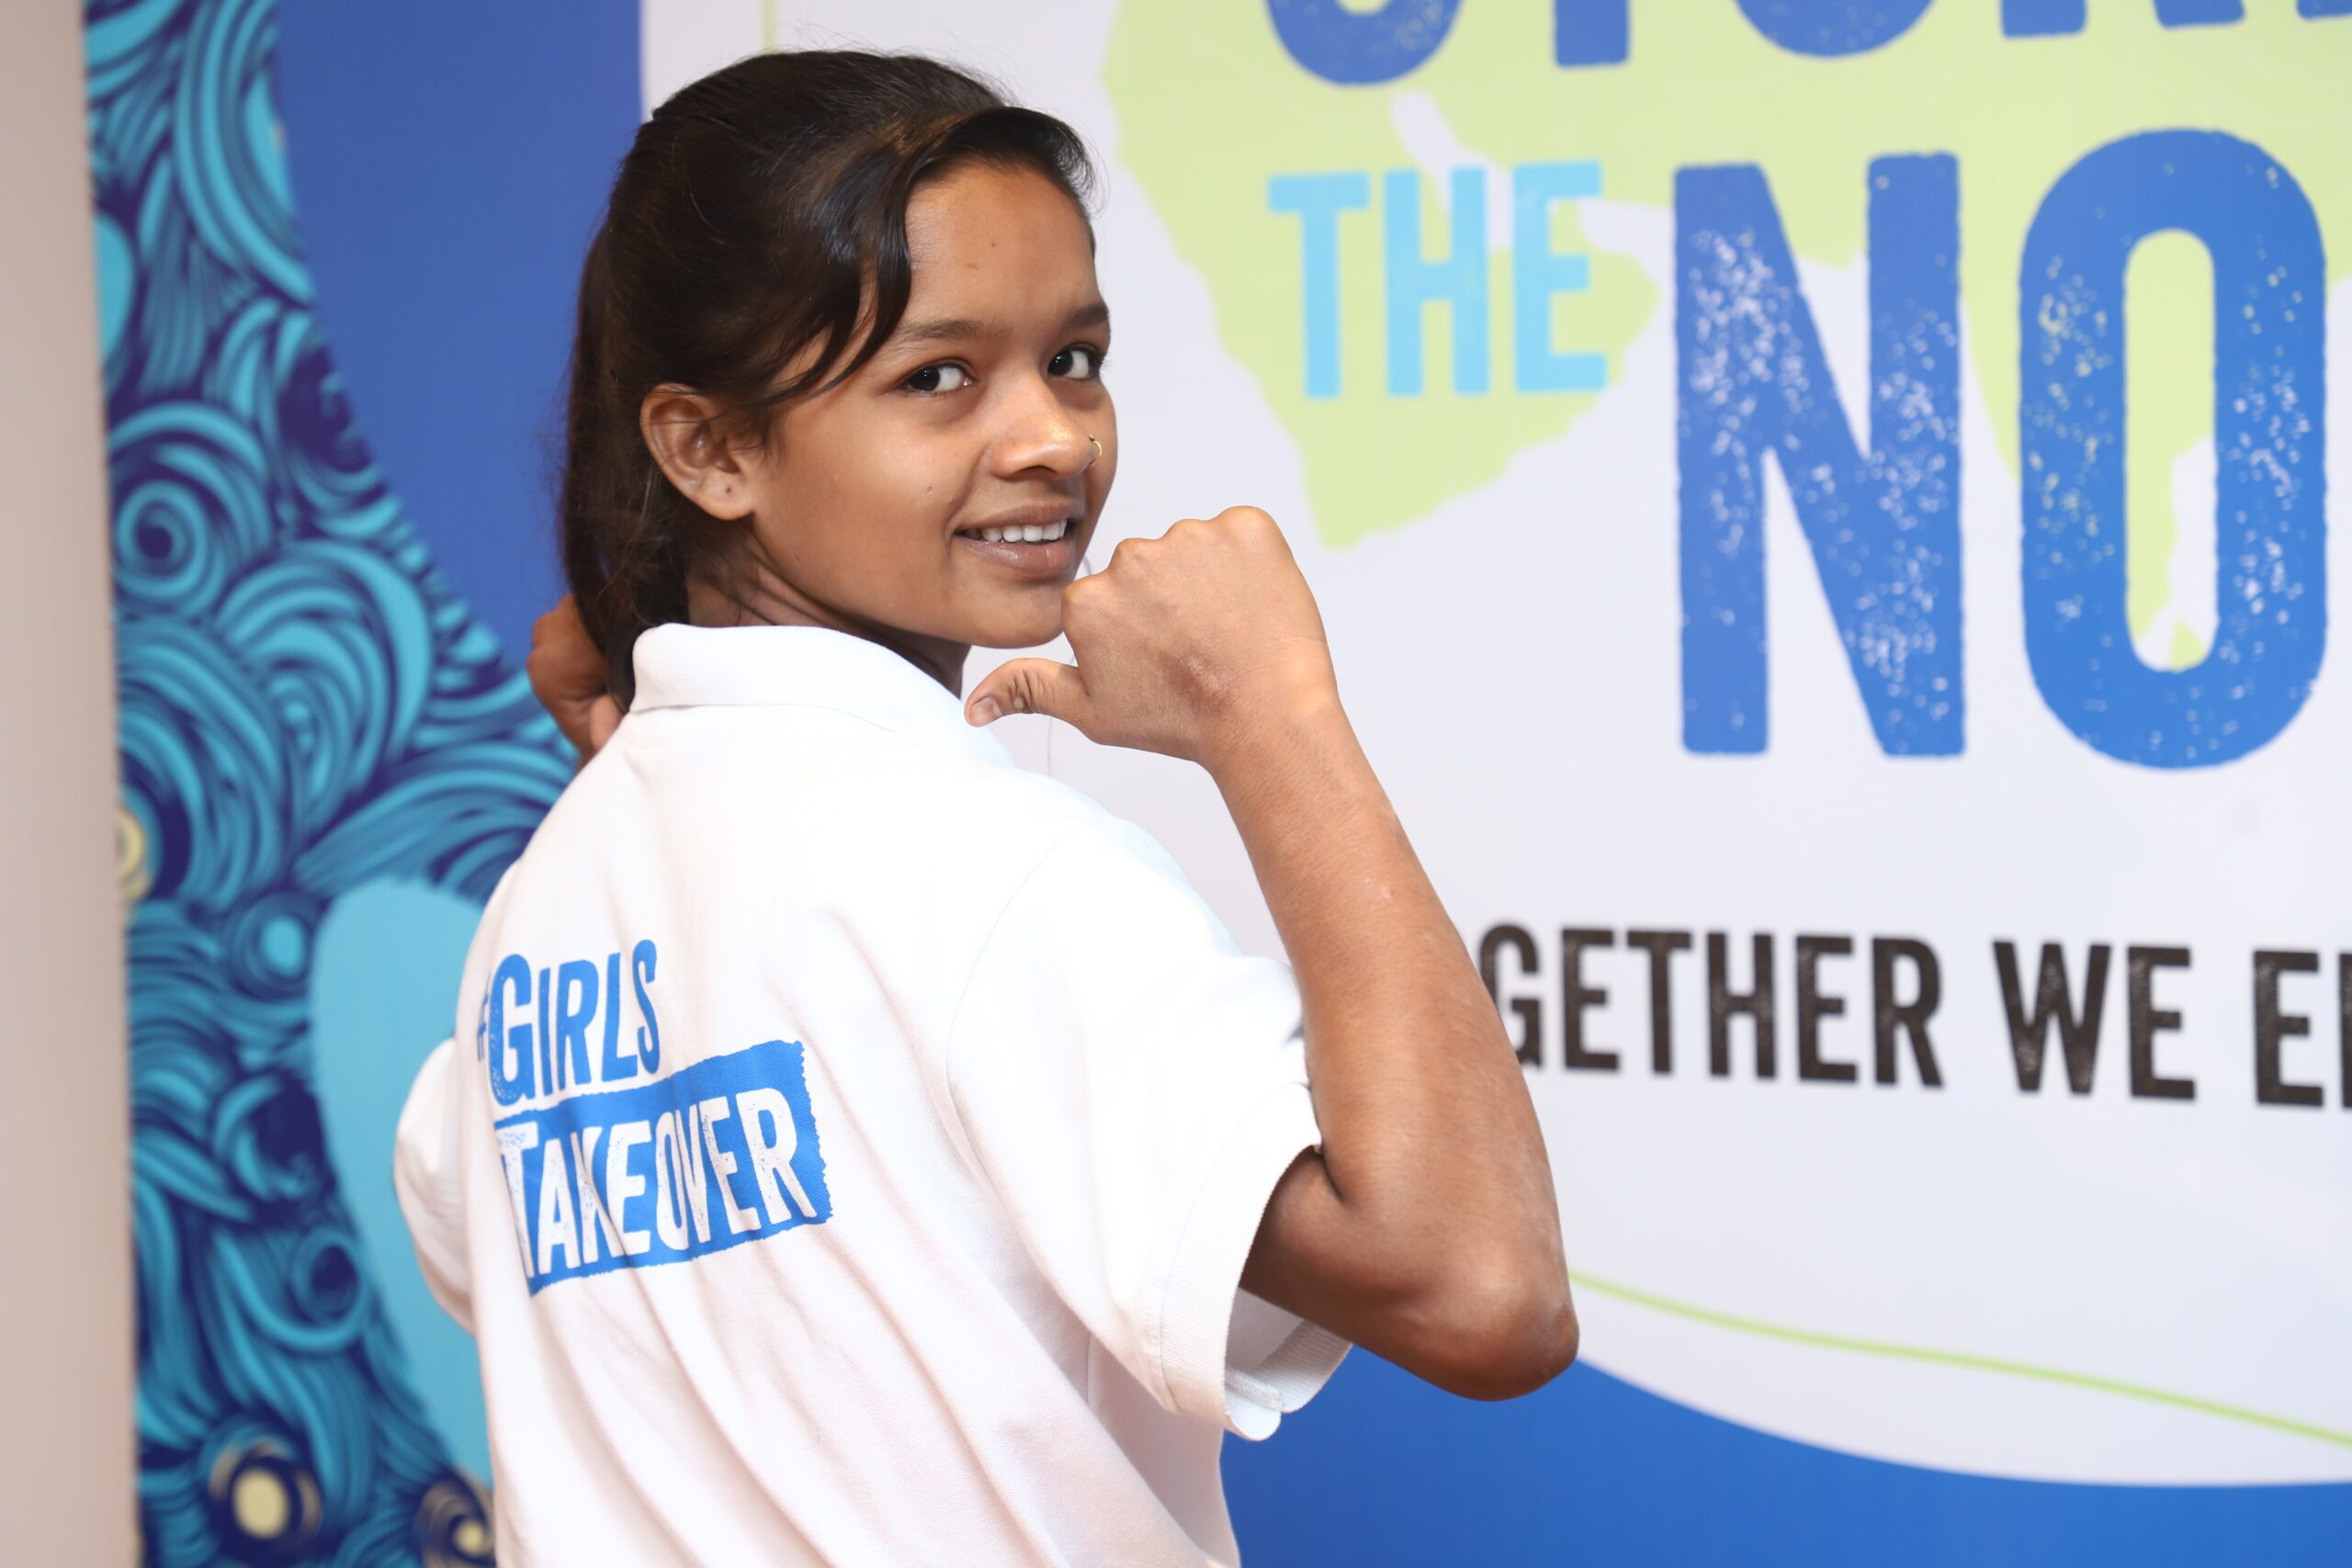 Neha looking into camera and pointing her finger at #GirlsTakeover design on her back.